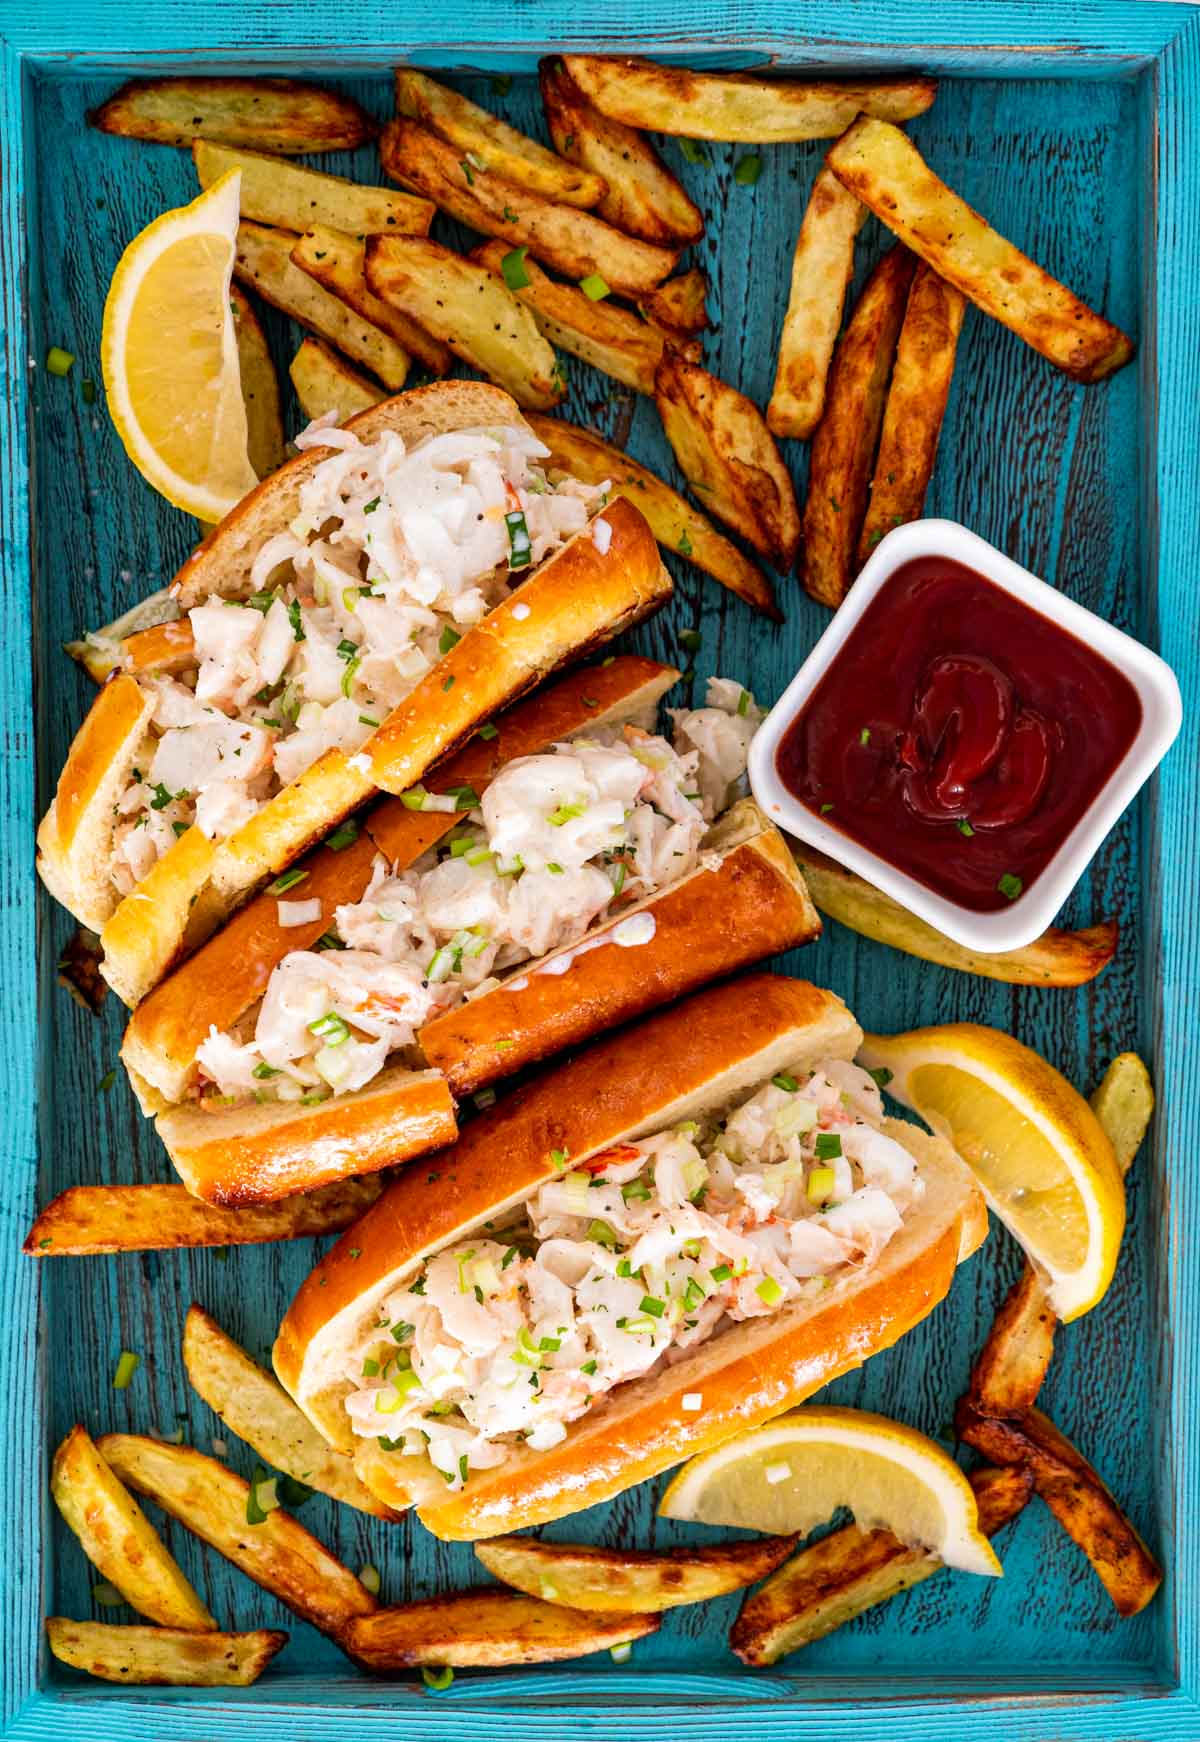 3 lobster rolls on a blue tray with french fries around and garnished with lemon wedges.